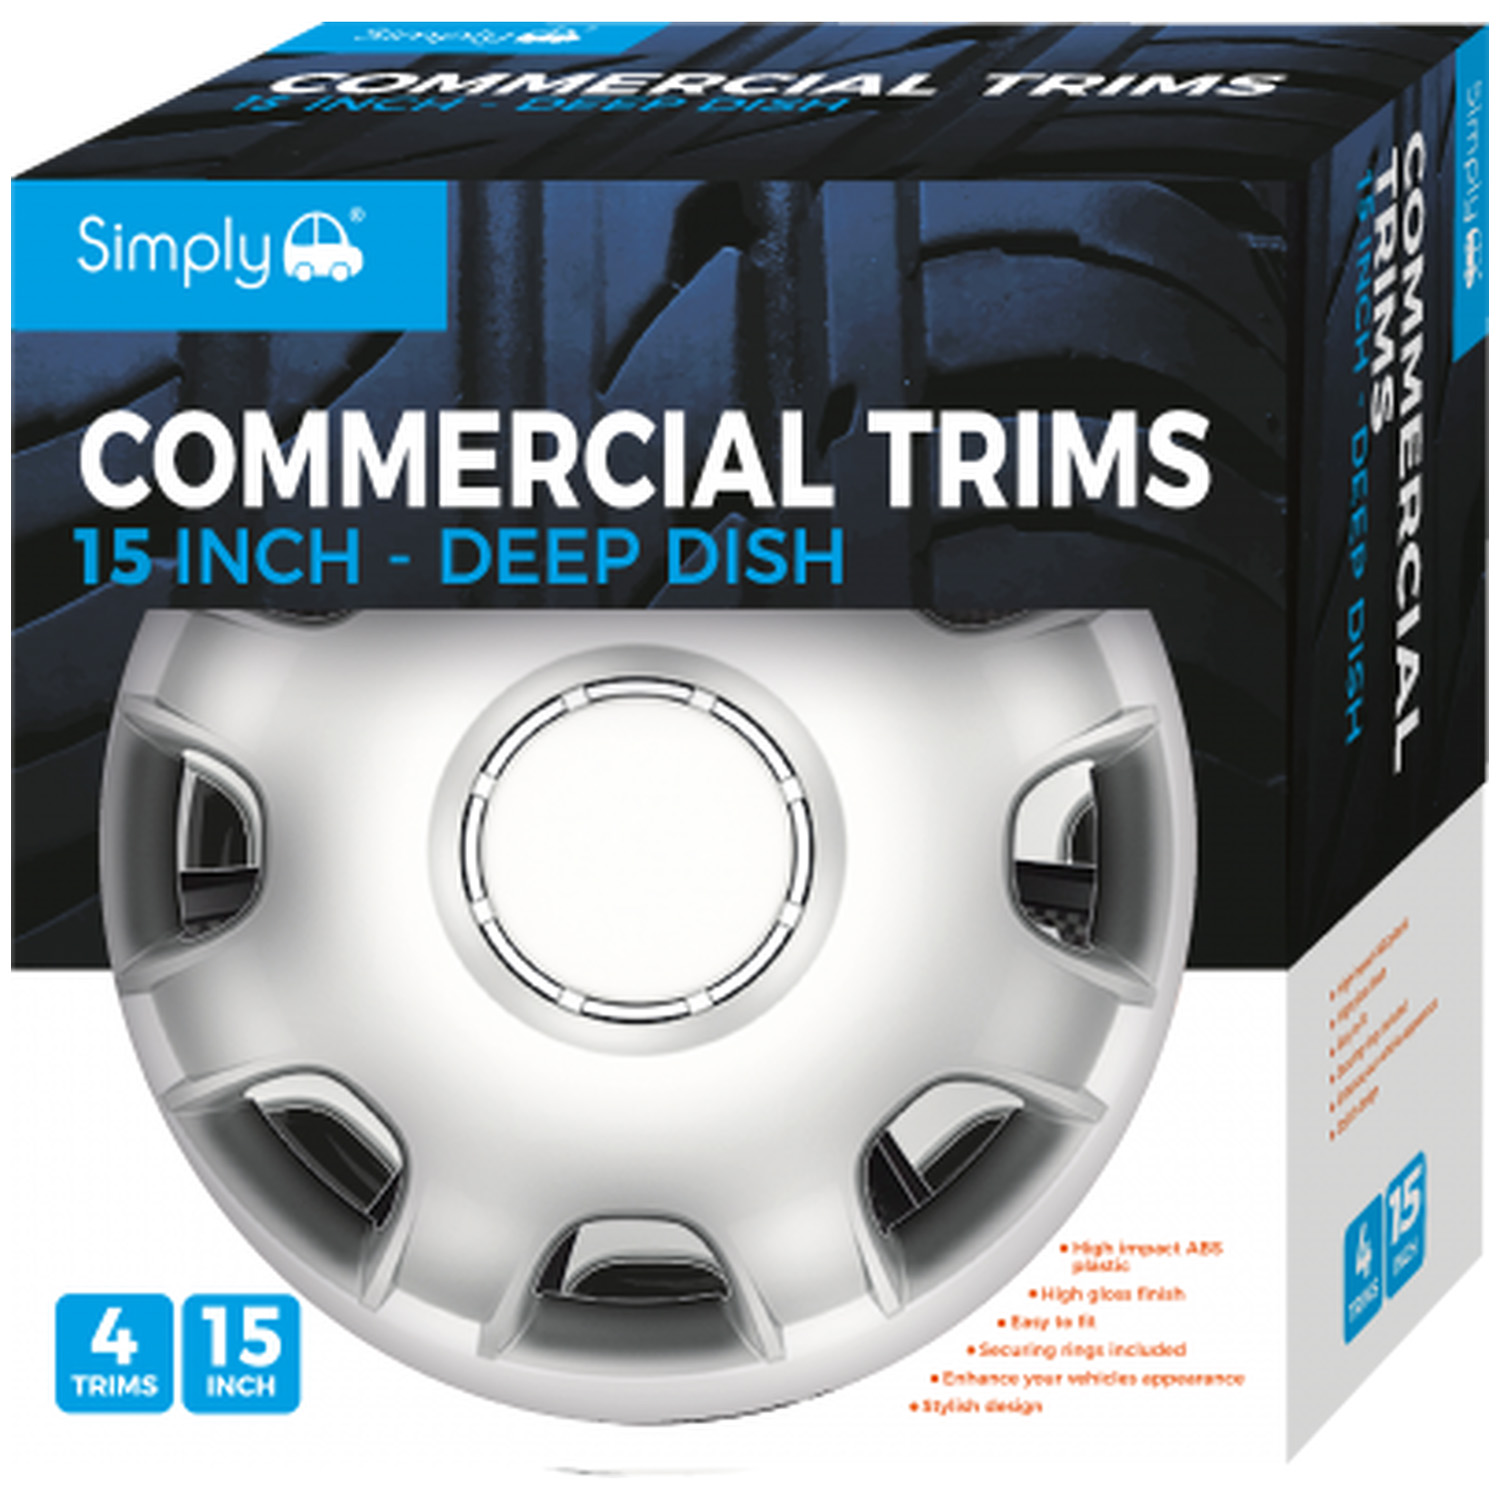 Simply Auto 15 inch Brawn Commercial Wheel Trims Image 1